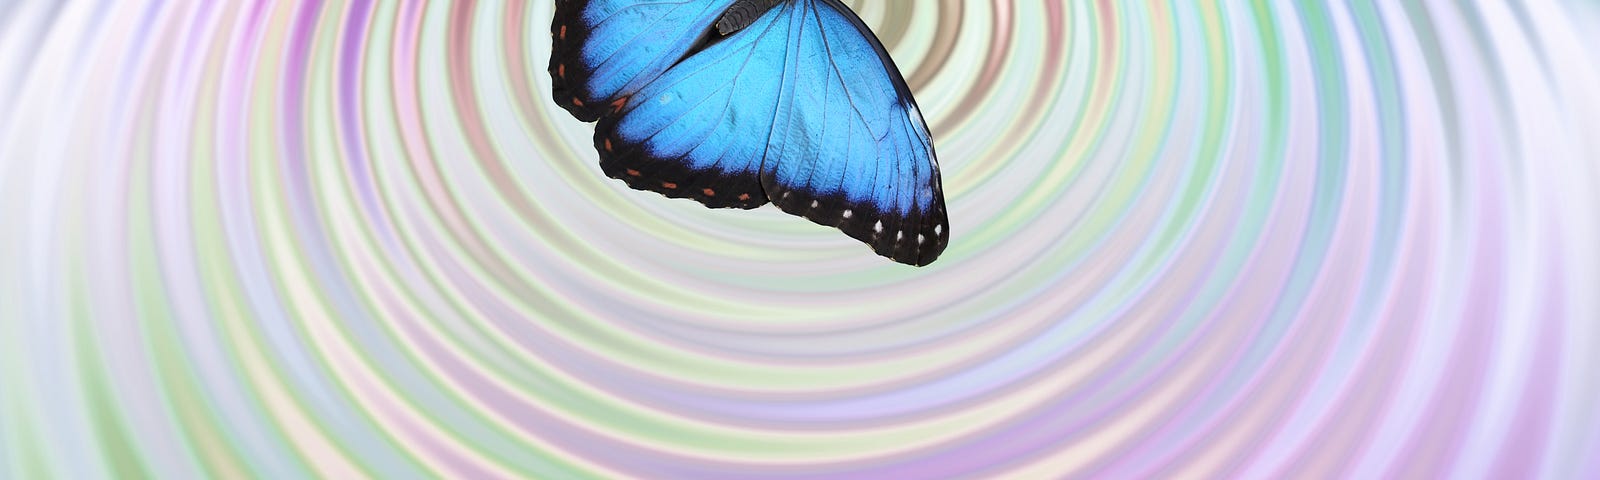 A beautiful illustration of a blue butterfly flying above a swirled background colored in light purple and green. The swirls represent the ripples indicative of the butterfly effect.